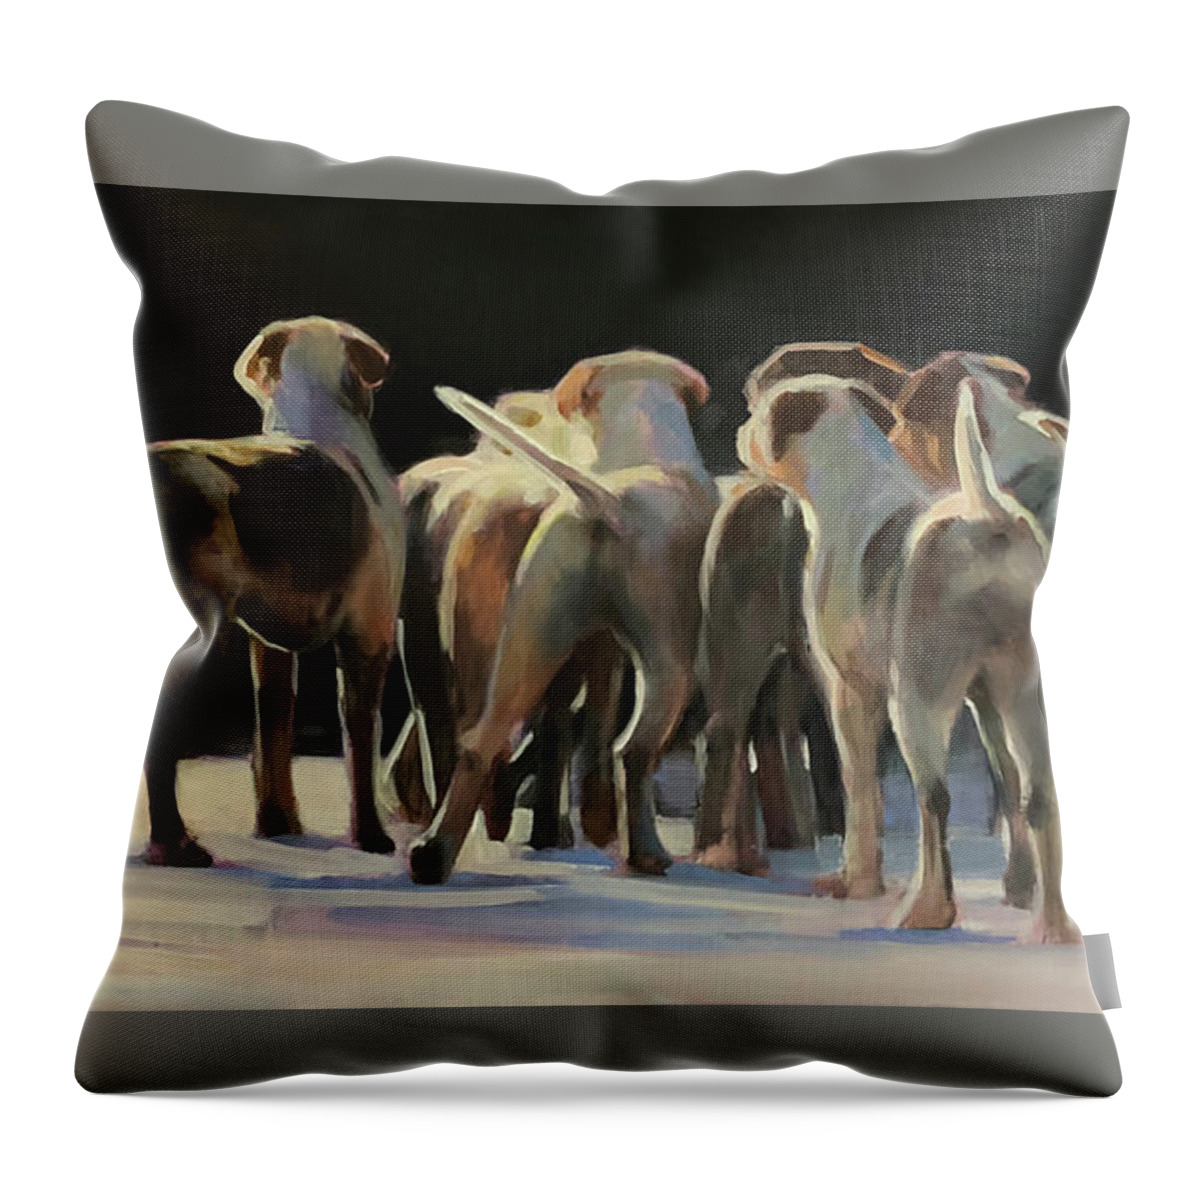 Hounds Throw Pillow featuring the painting Happy Tails Waggin Train by Susan Bradbury